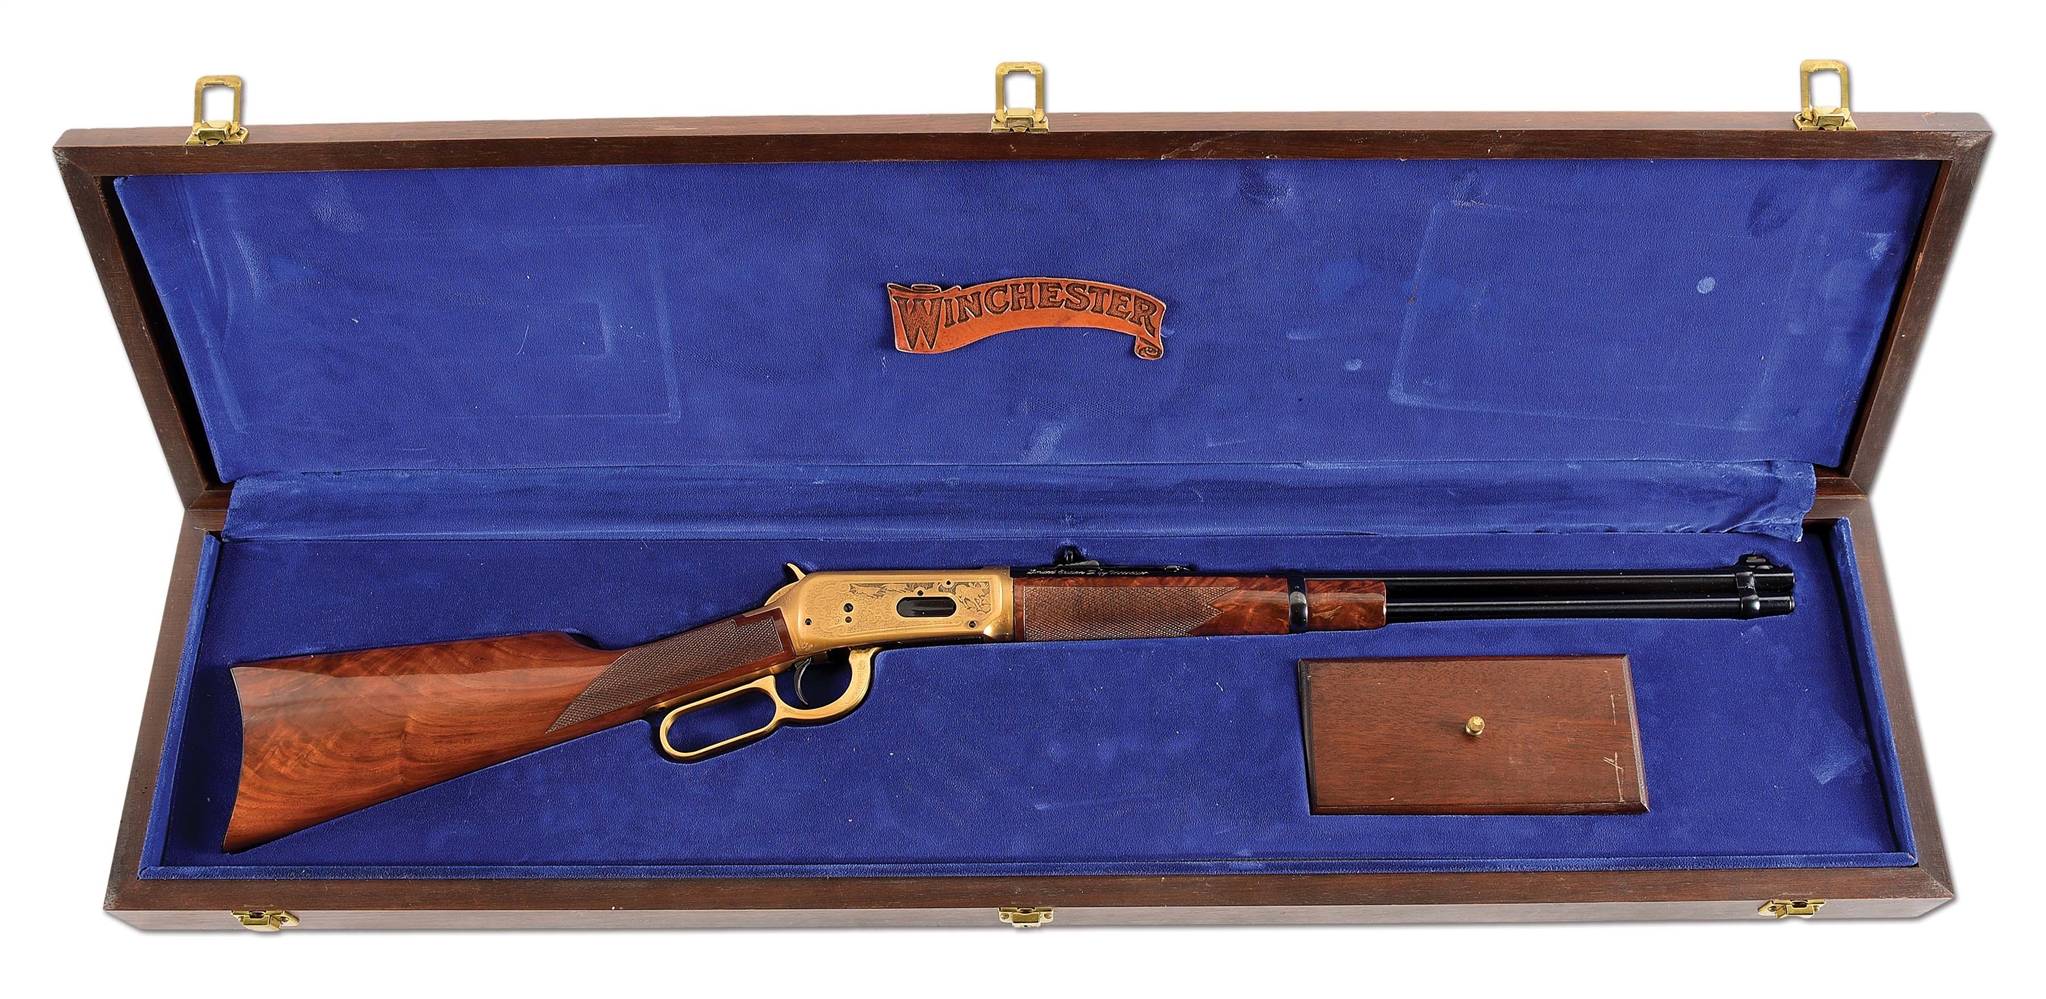 (M) WINCHESTER MODEL 94 LIMITED EDITION II LEVER ACTION RIFLE 